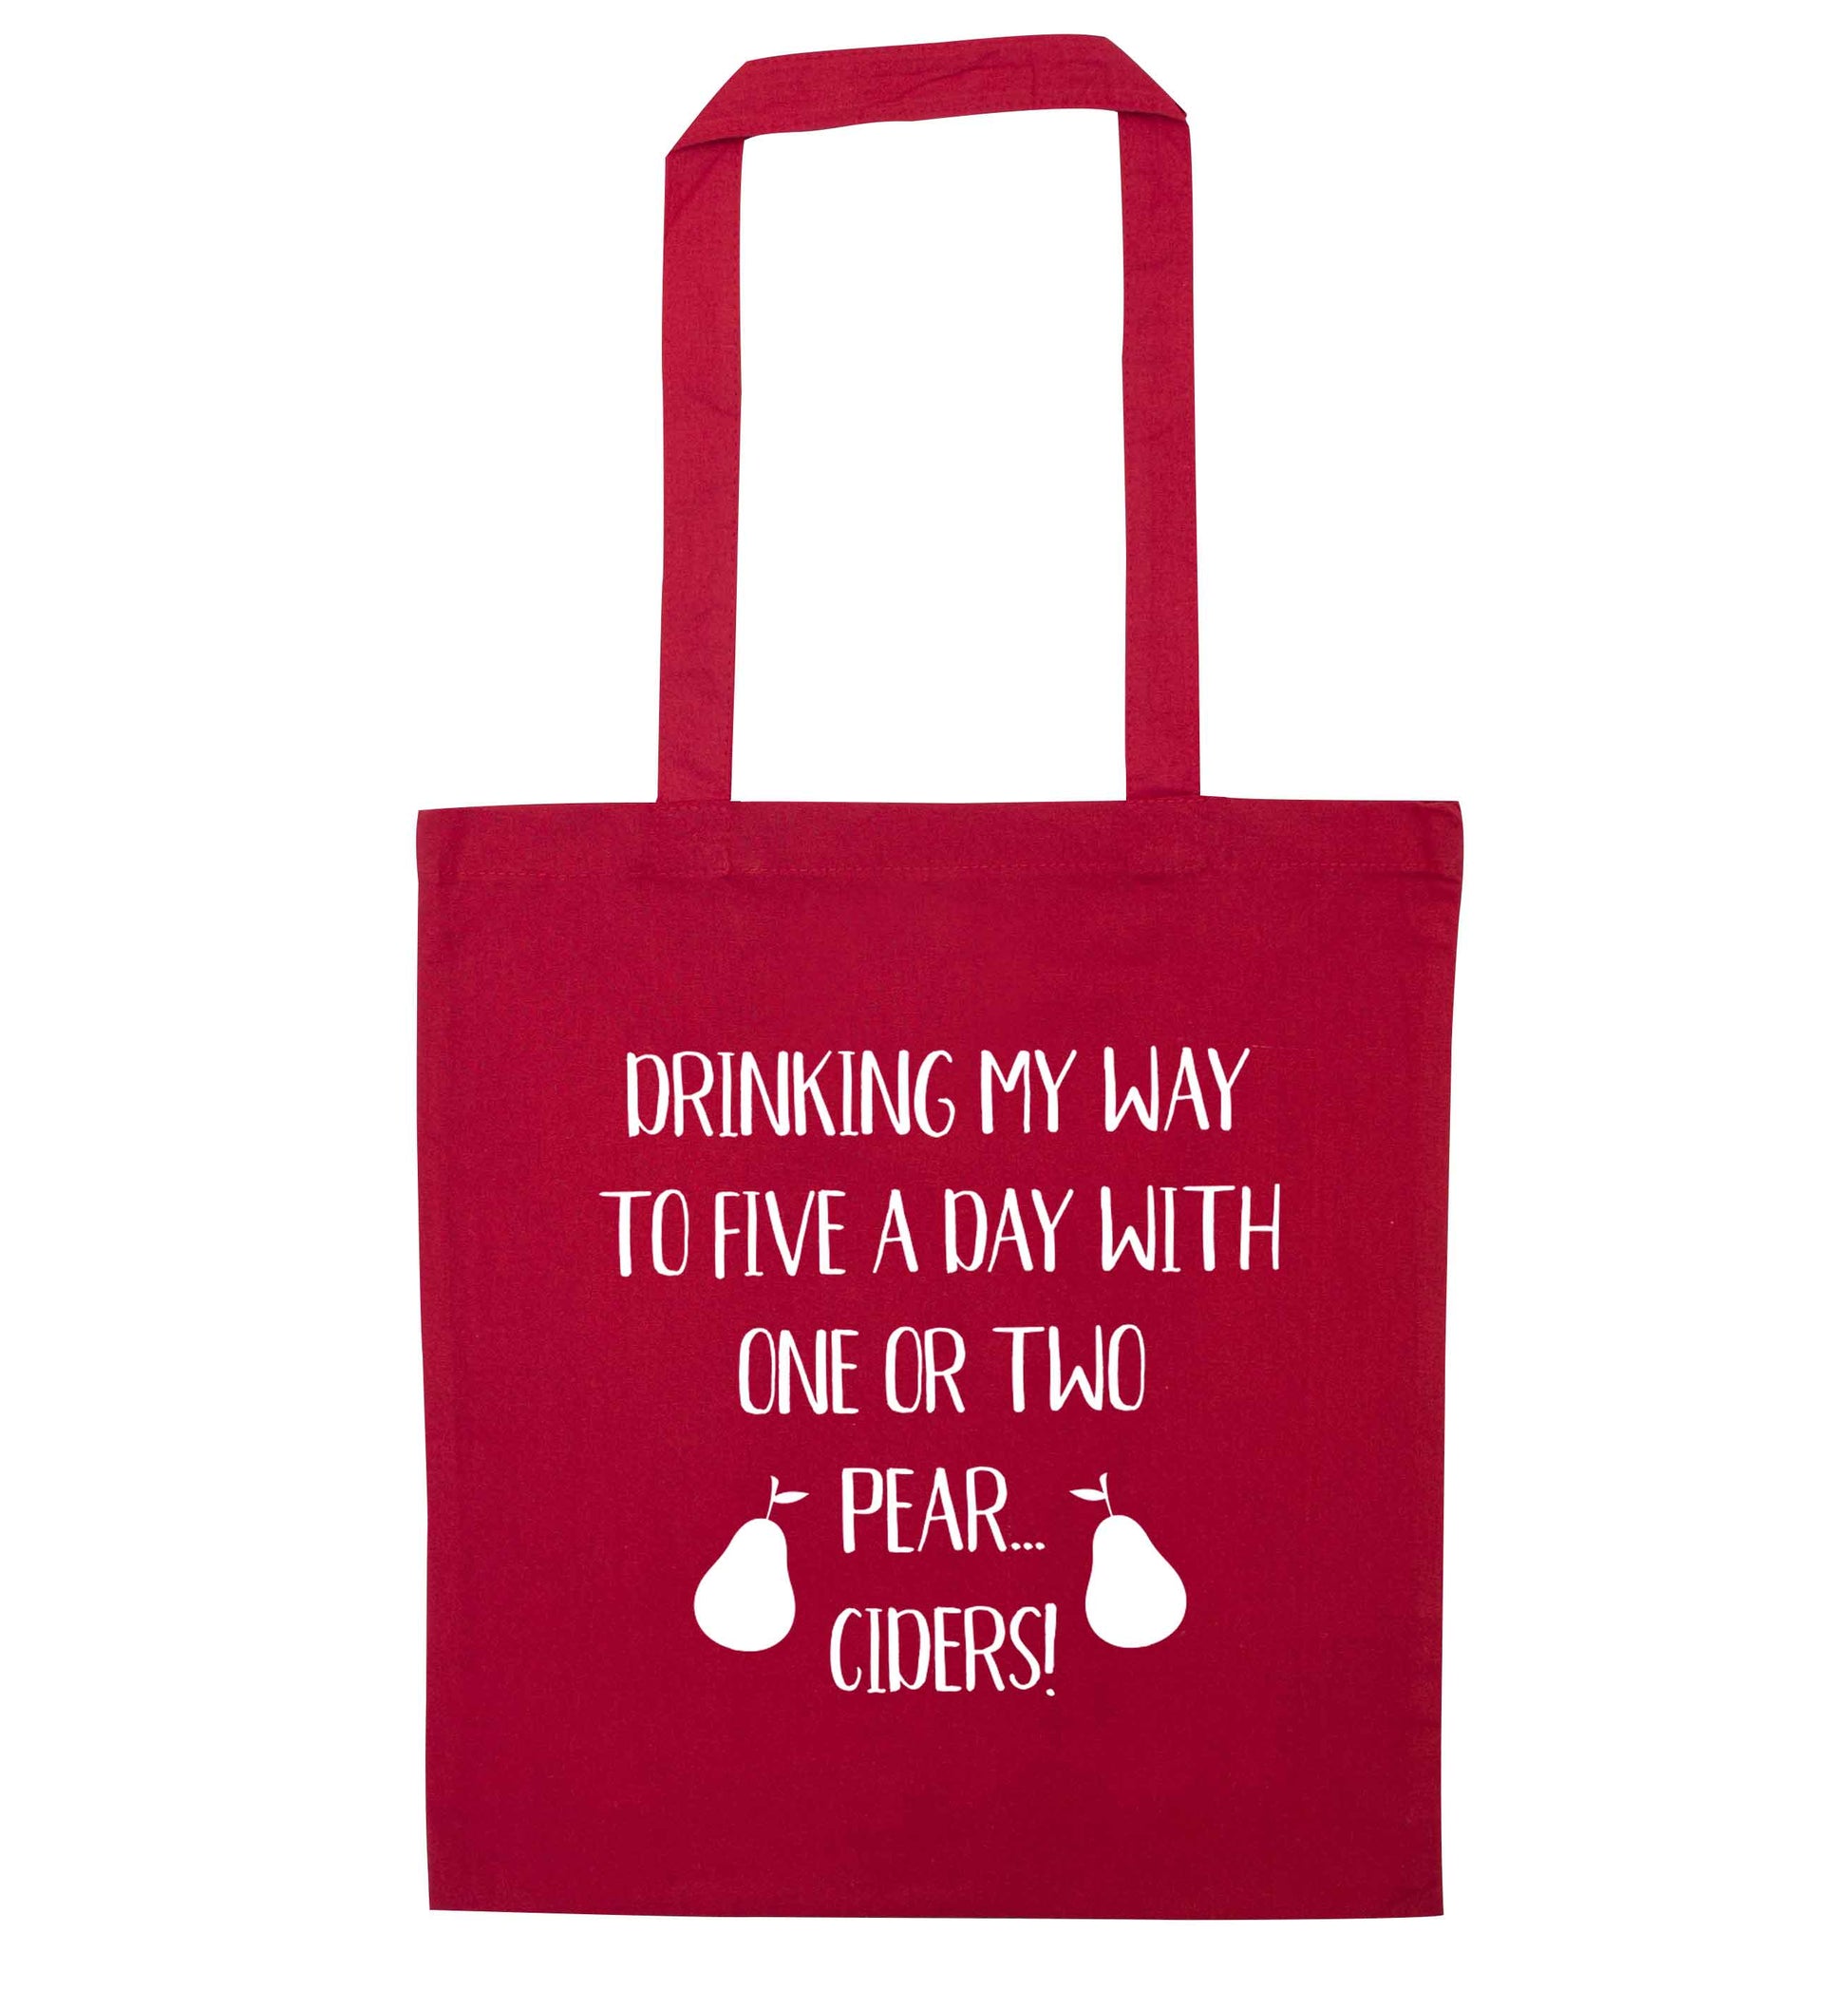 Drinking my way to five a day with one or two strawberry ciders red tote bag